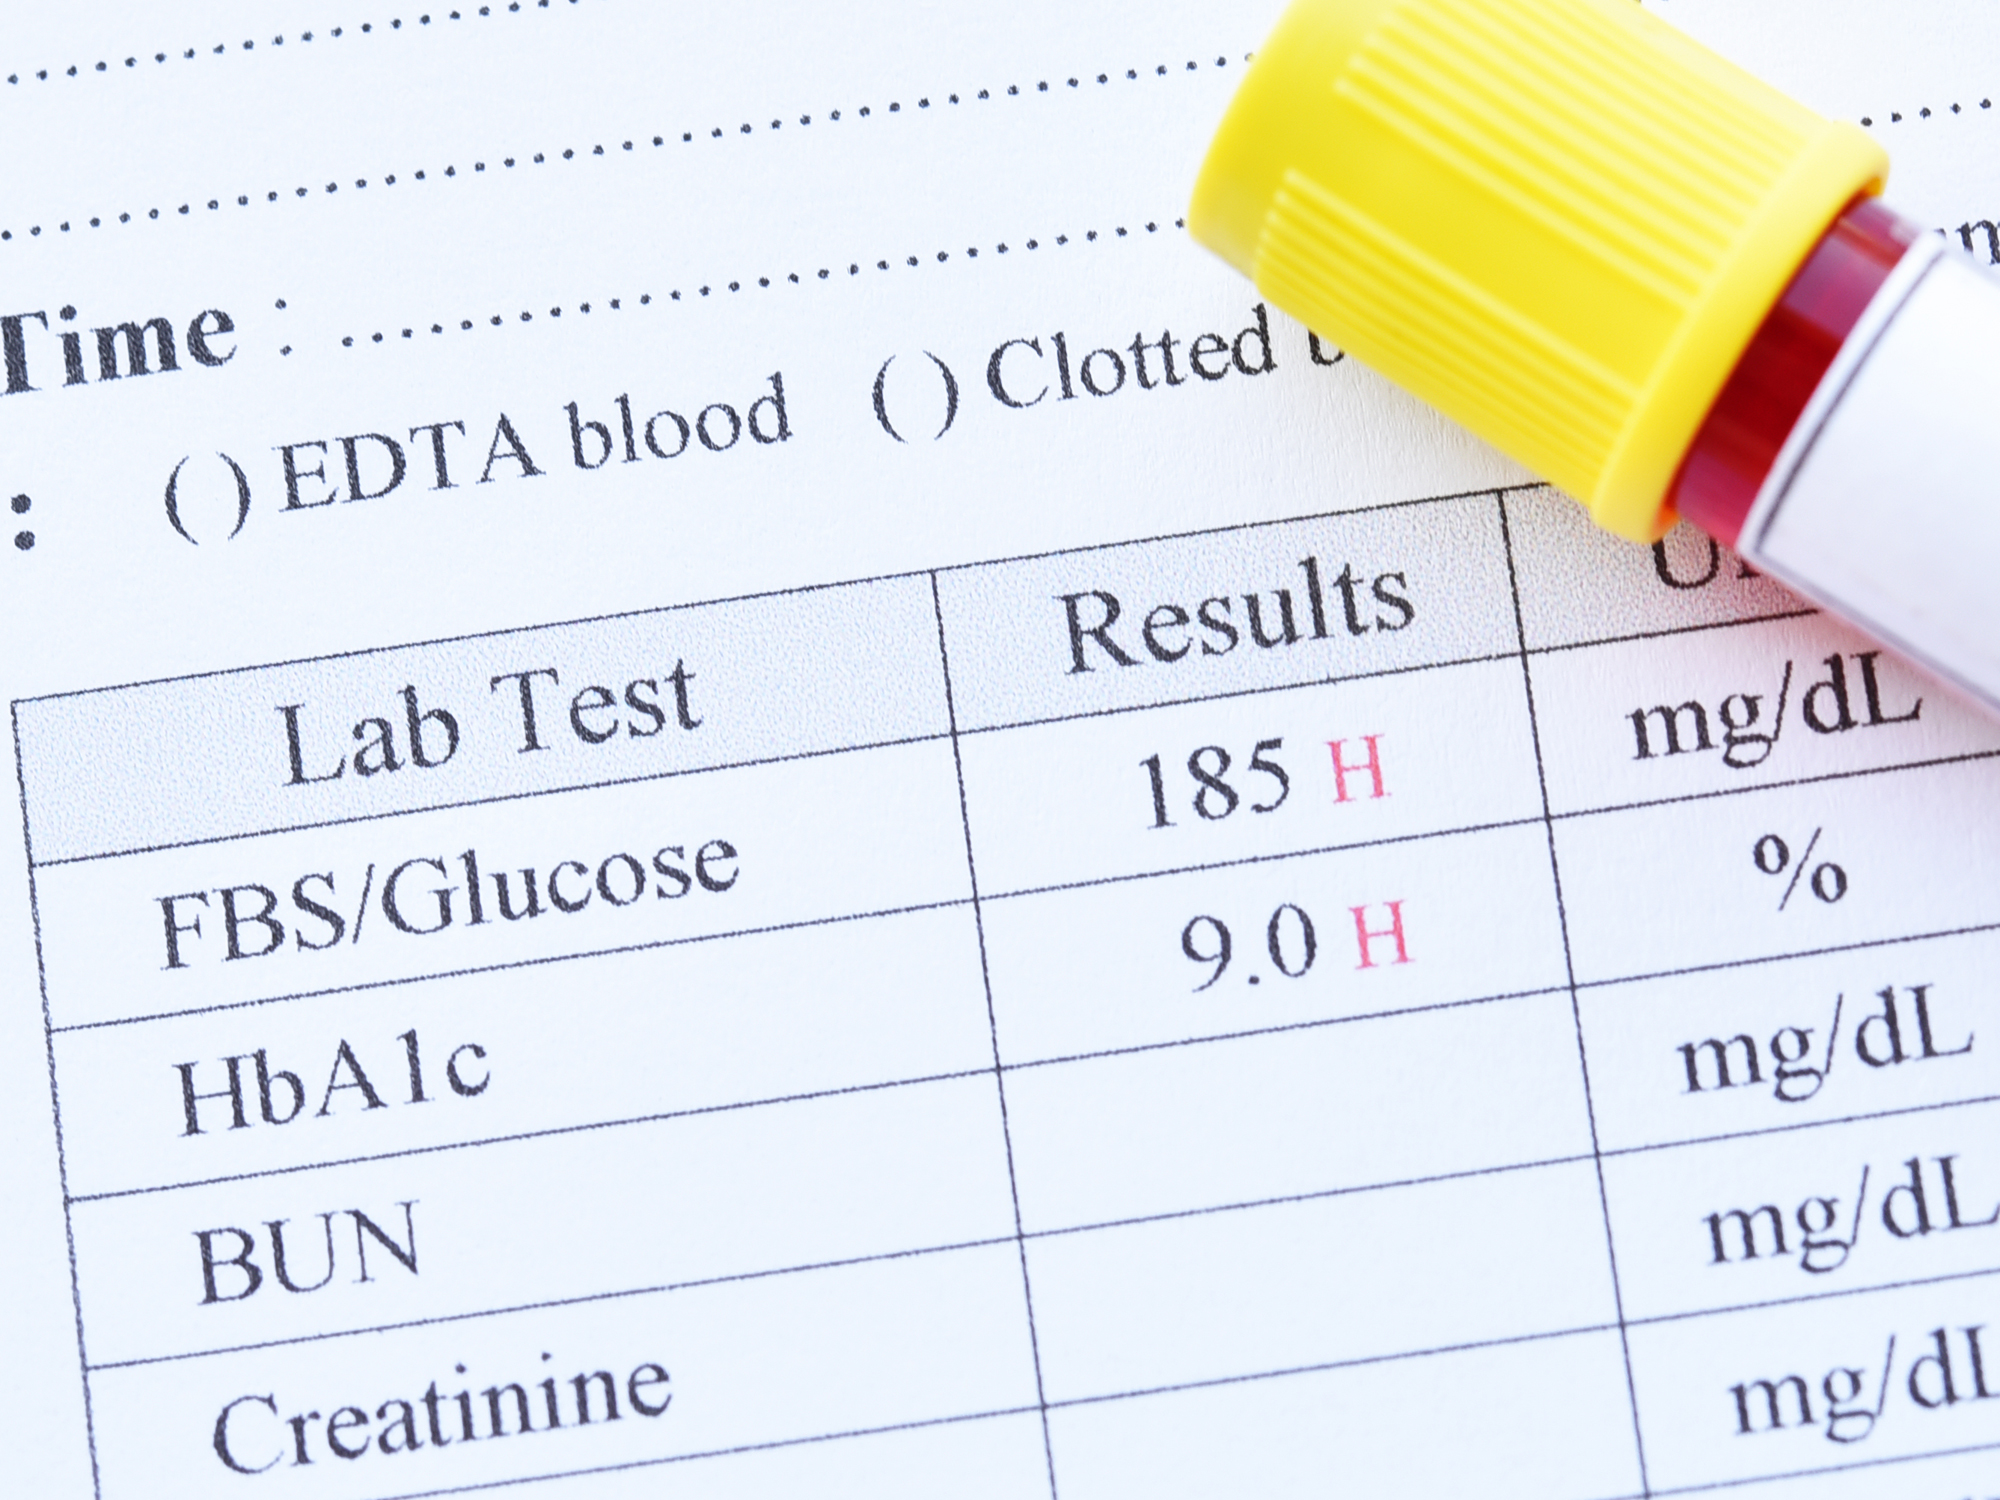 Did the ‘gold standard’ diabetes test that’s mostly wrong miss your diagnosis?